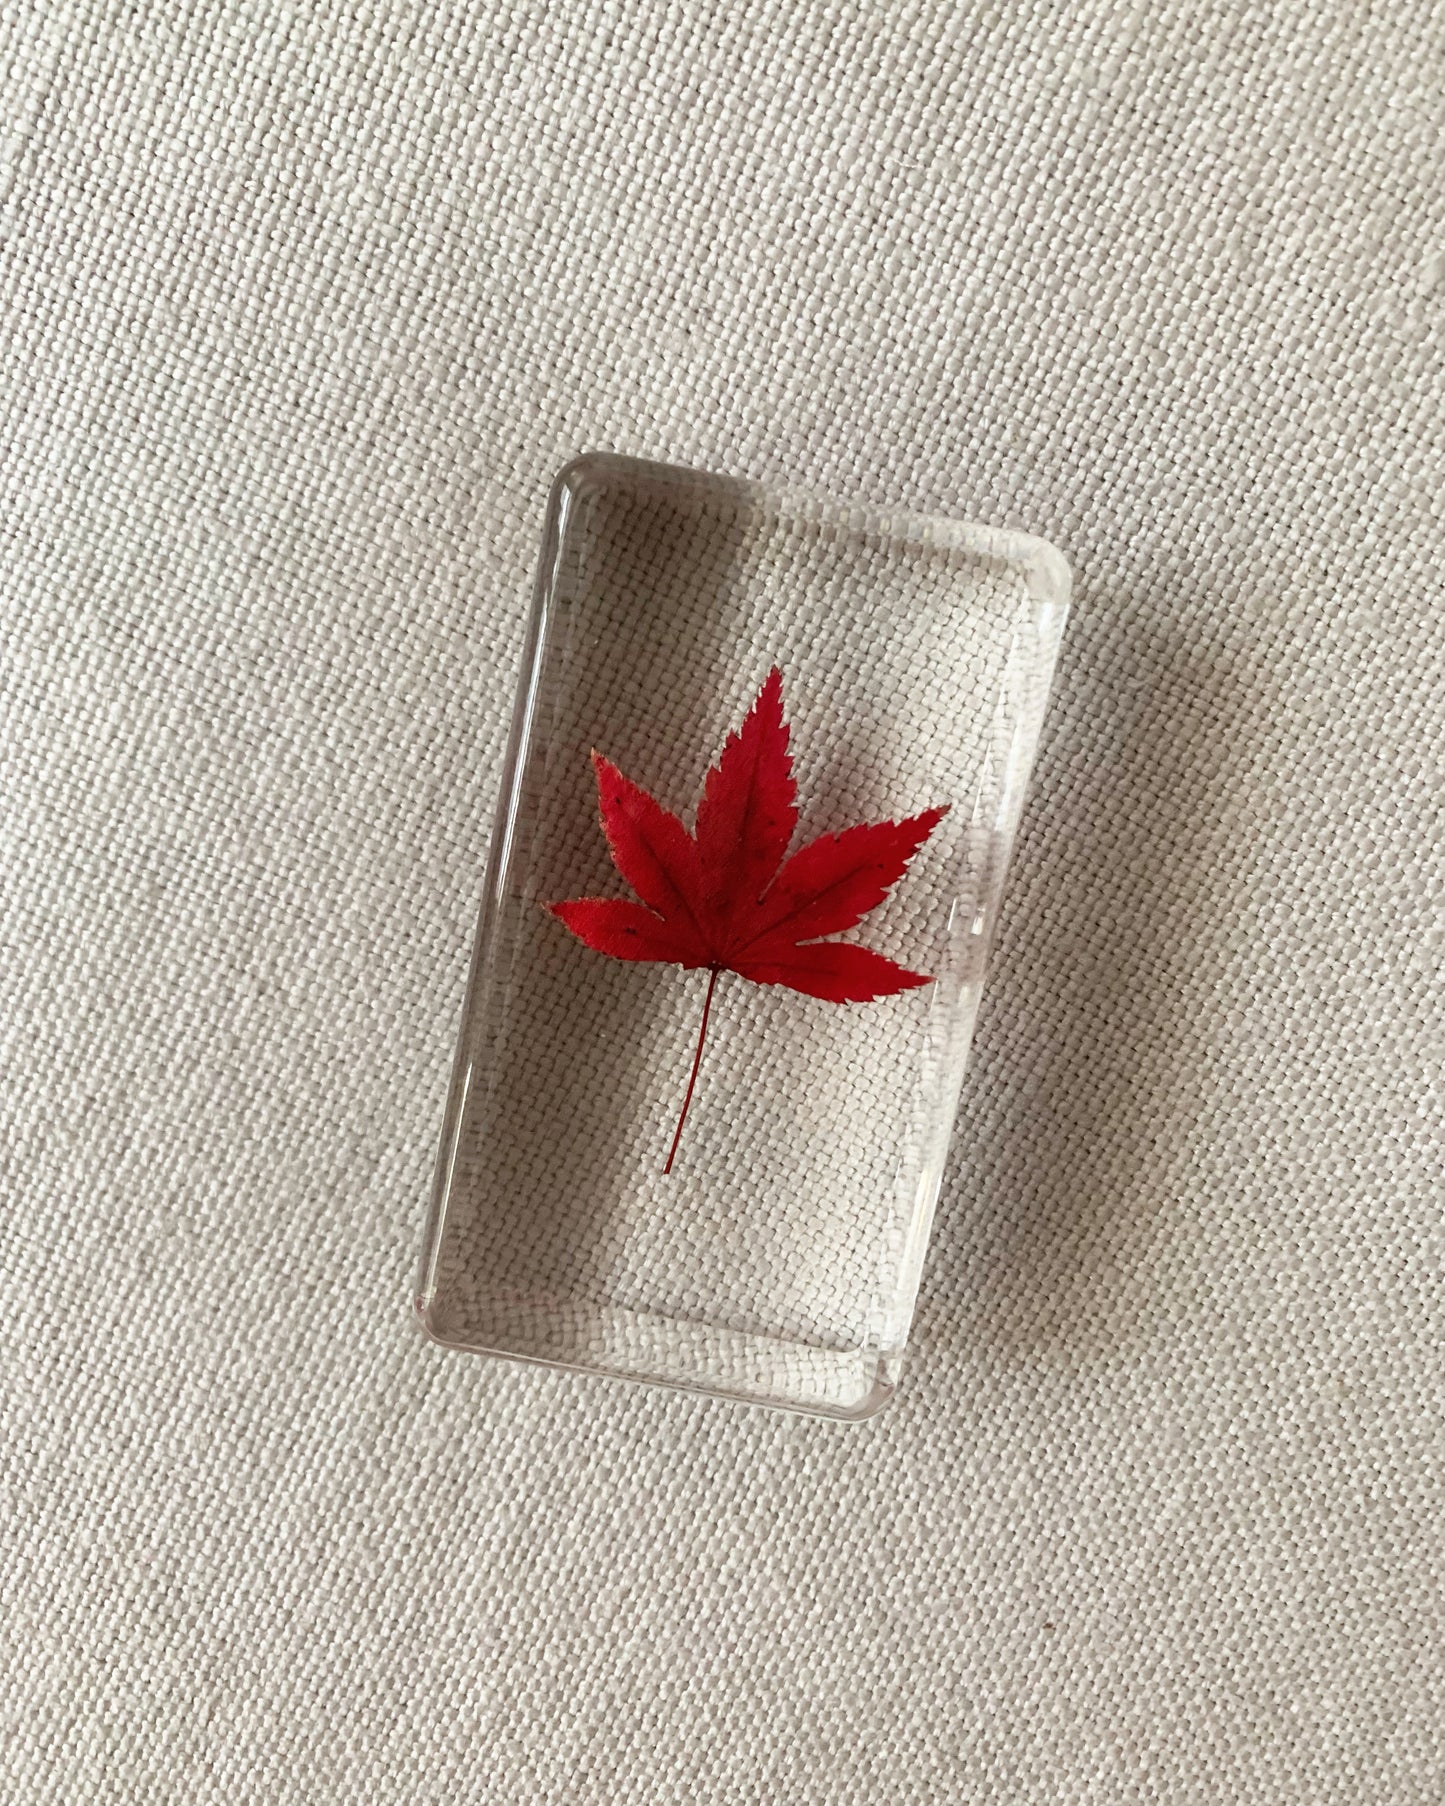 Red Maple leaf preserved and delicately suspended in resin. Approximately 1.5" x 3". 